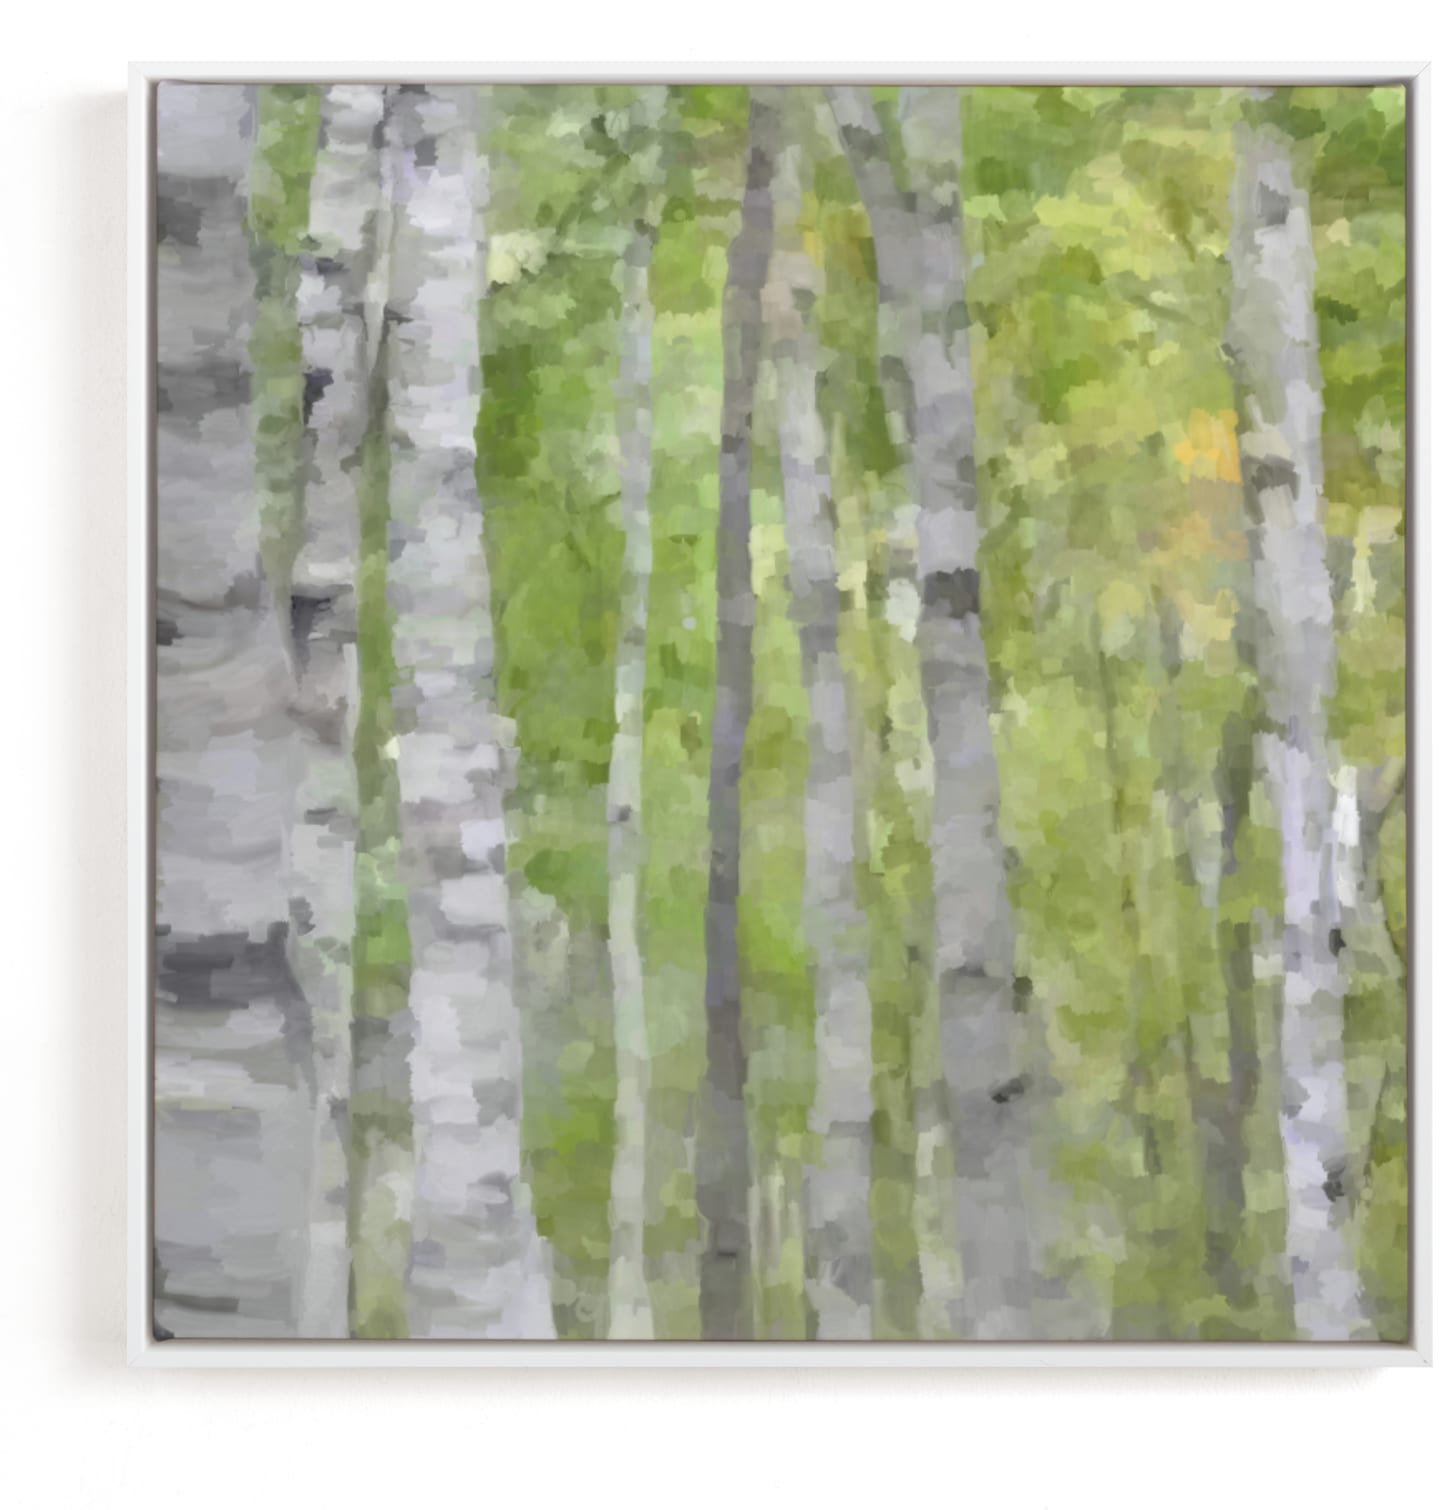 This is a grey art by Amy Hall called Summer Birches.